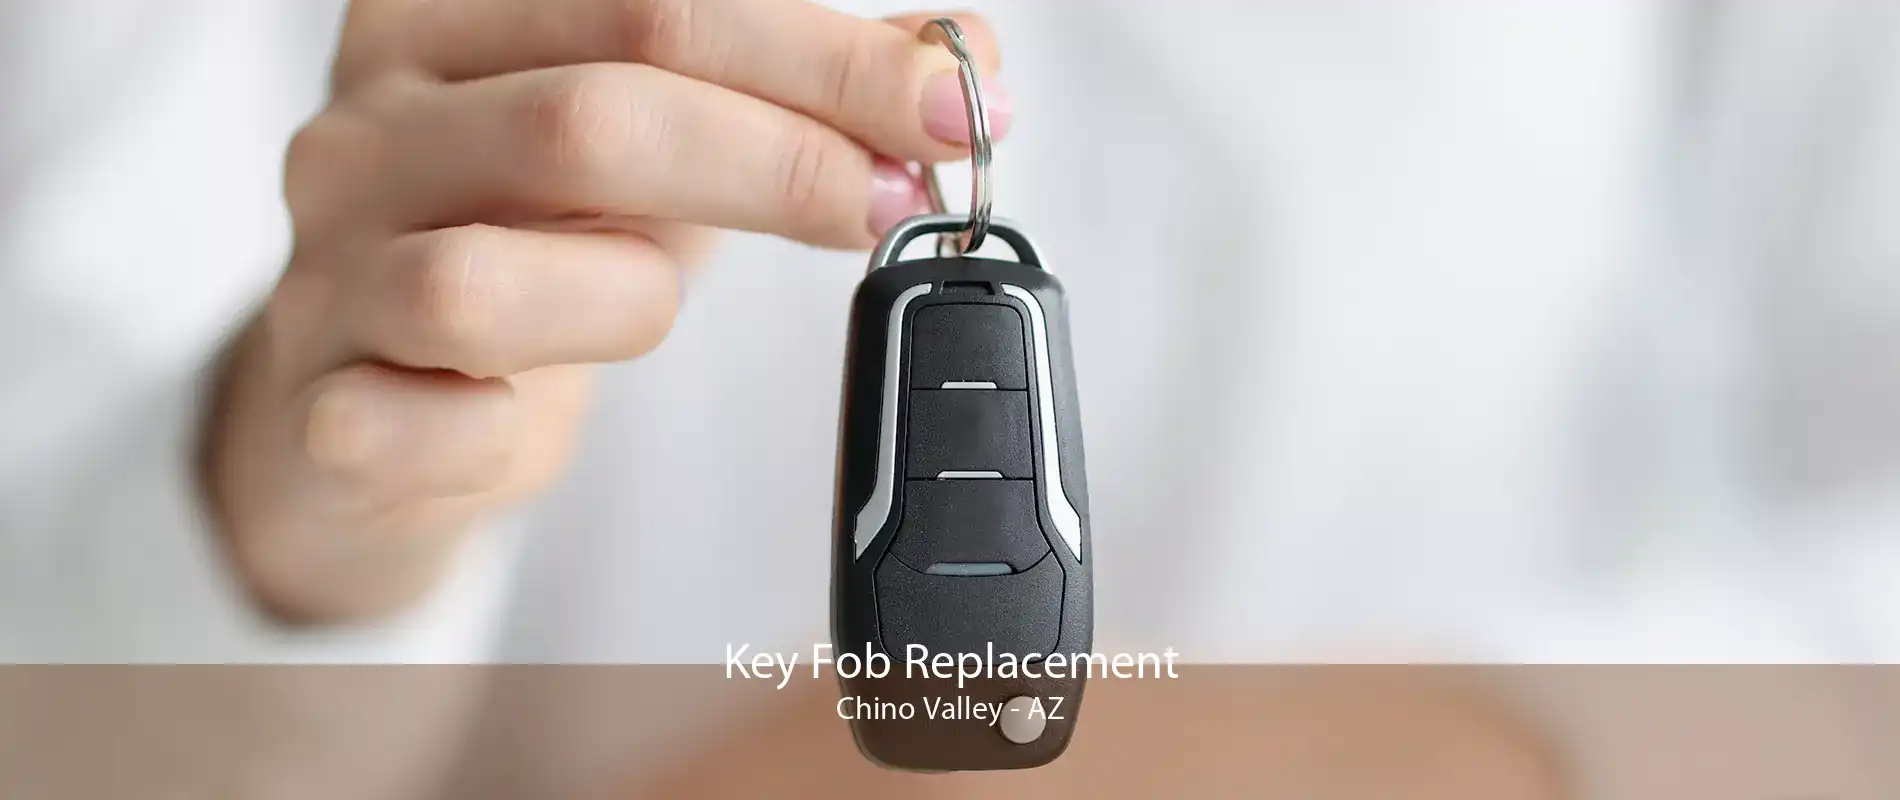 Key Fob Replacement Chino Valley - AZ